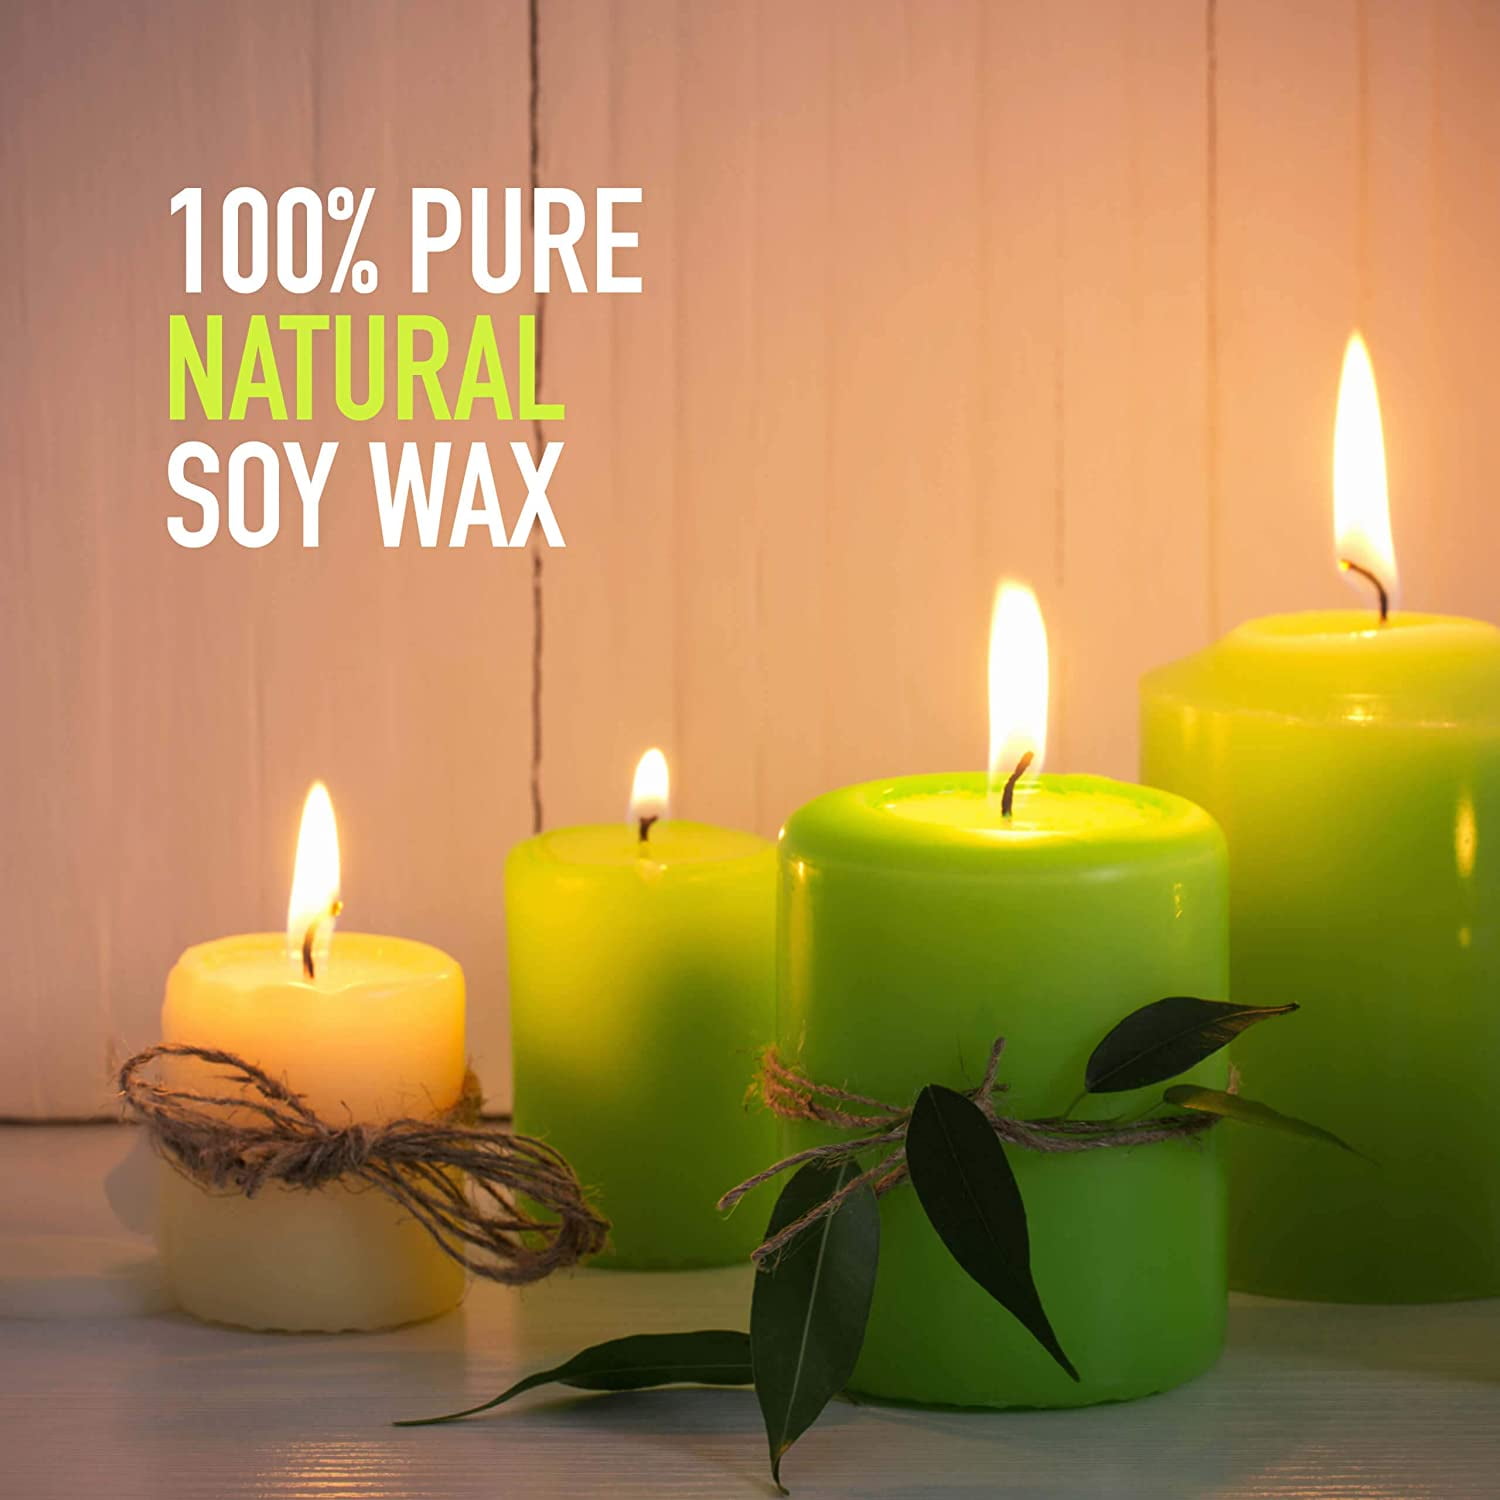 Oraganix Natural Soy Wax for DIY Candle Making Supplies 10lb Bag with 150ct 6